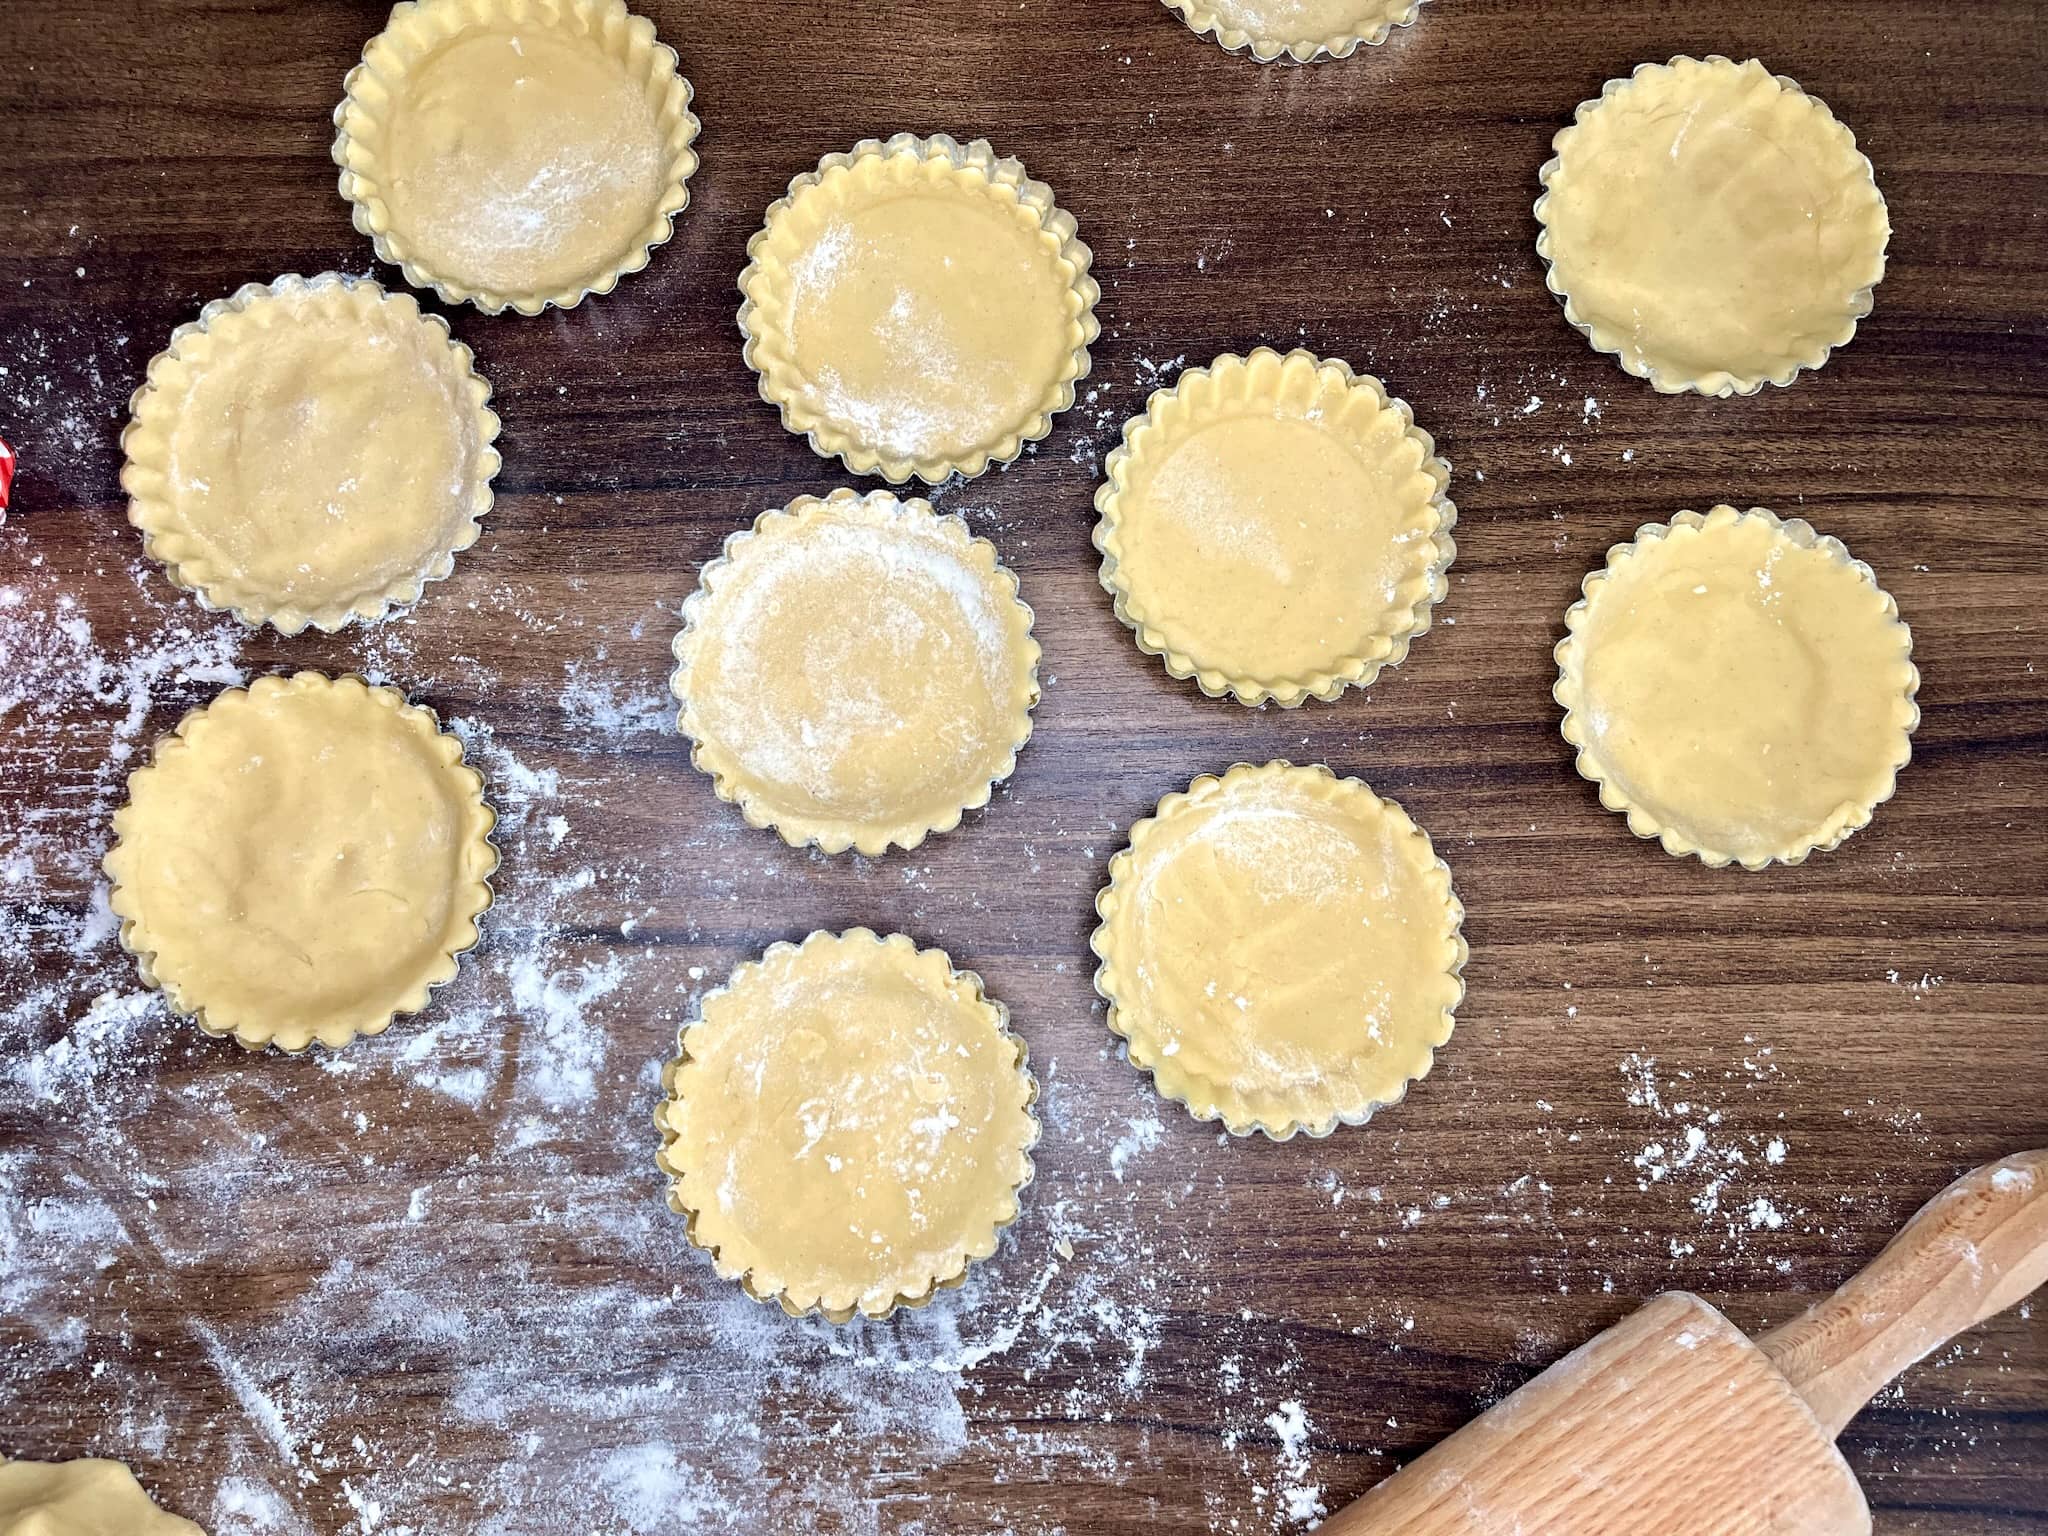 The tart shells are well-formed inside the tins and ready to be baked